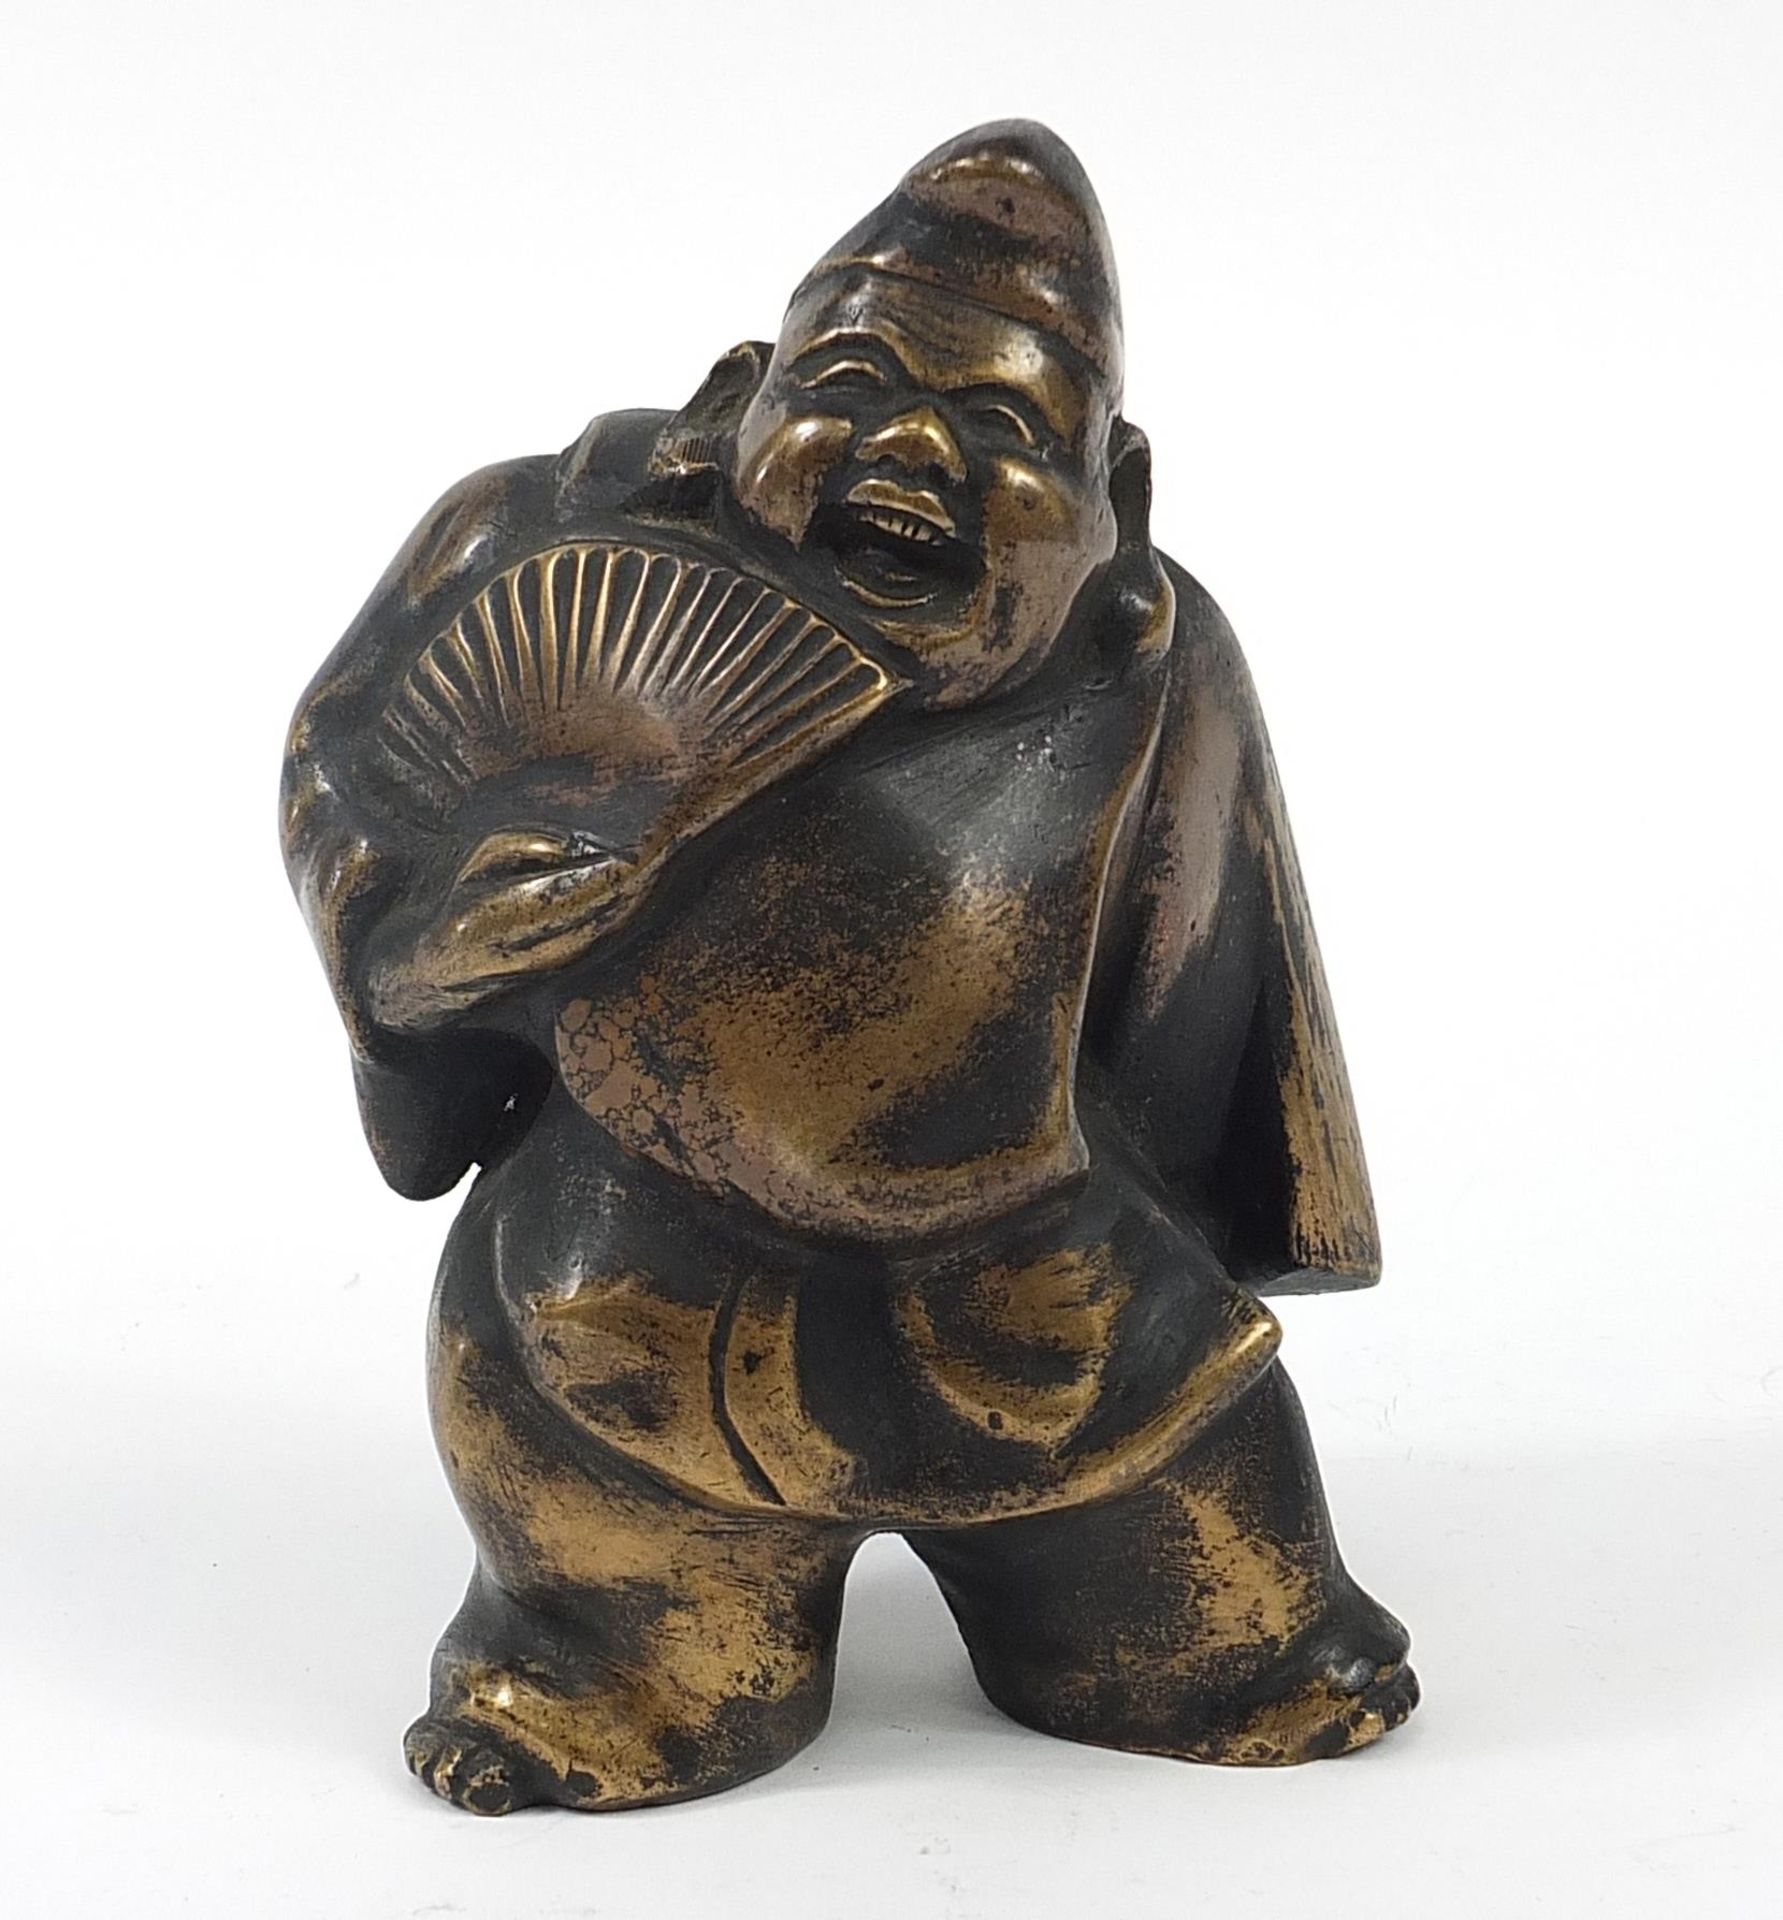 Japanese patinated bronze sculpture of a warrior holding a fan, 19.5cm high Overall in generally